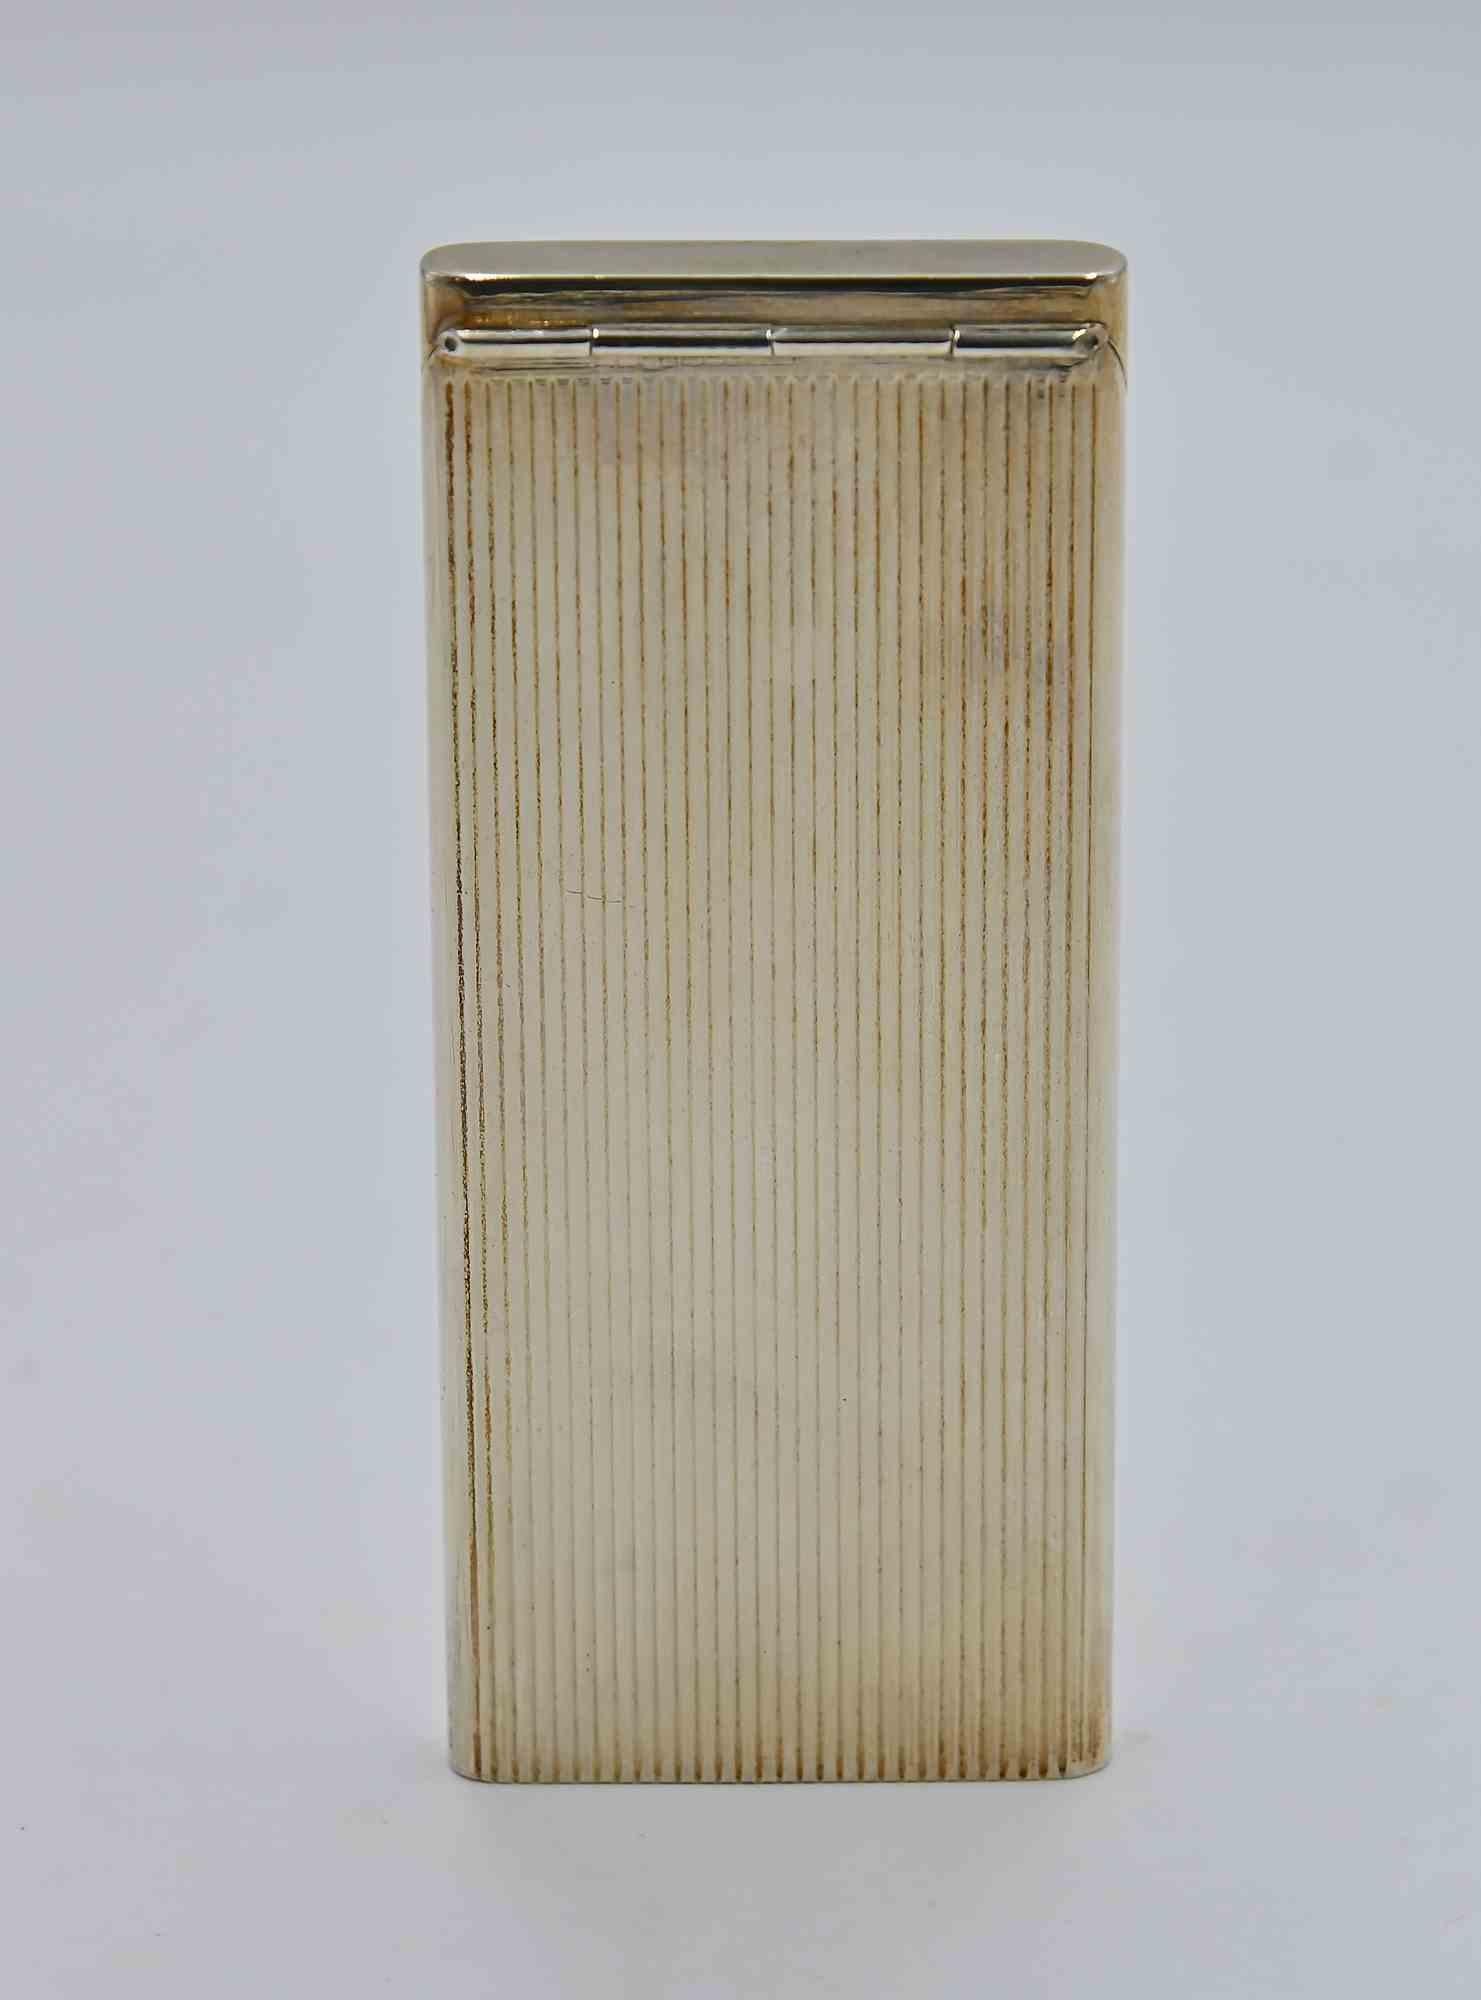 Silver cigarette holder, 1940s.

Hand made.

12 x 5 cm.

Good conditions